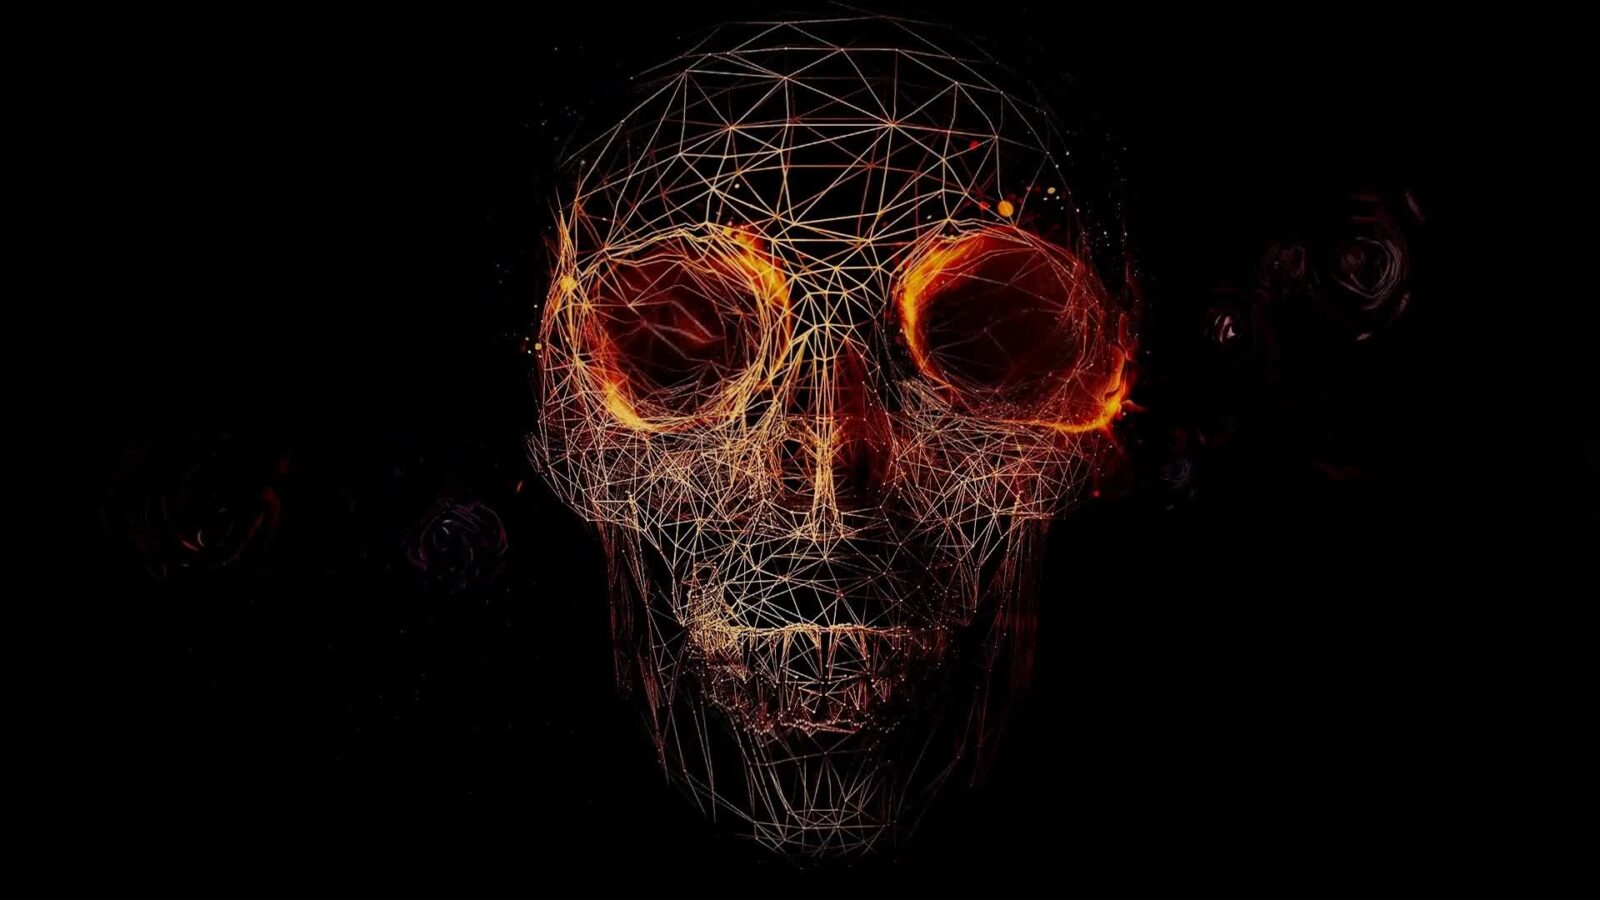 Live Desktop Wallpapers | 3D Scary Skull Abstract Shapes - Free Live Wallpaper